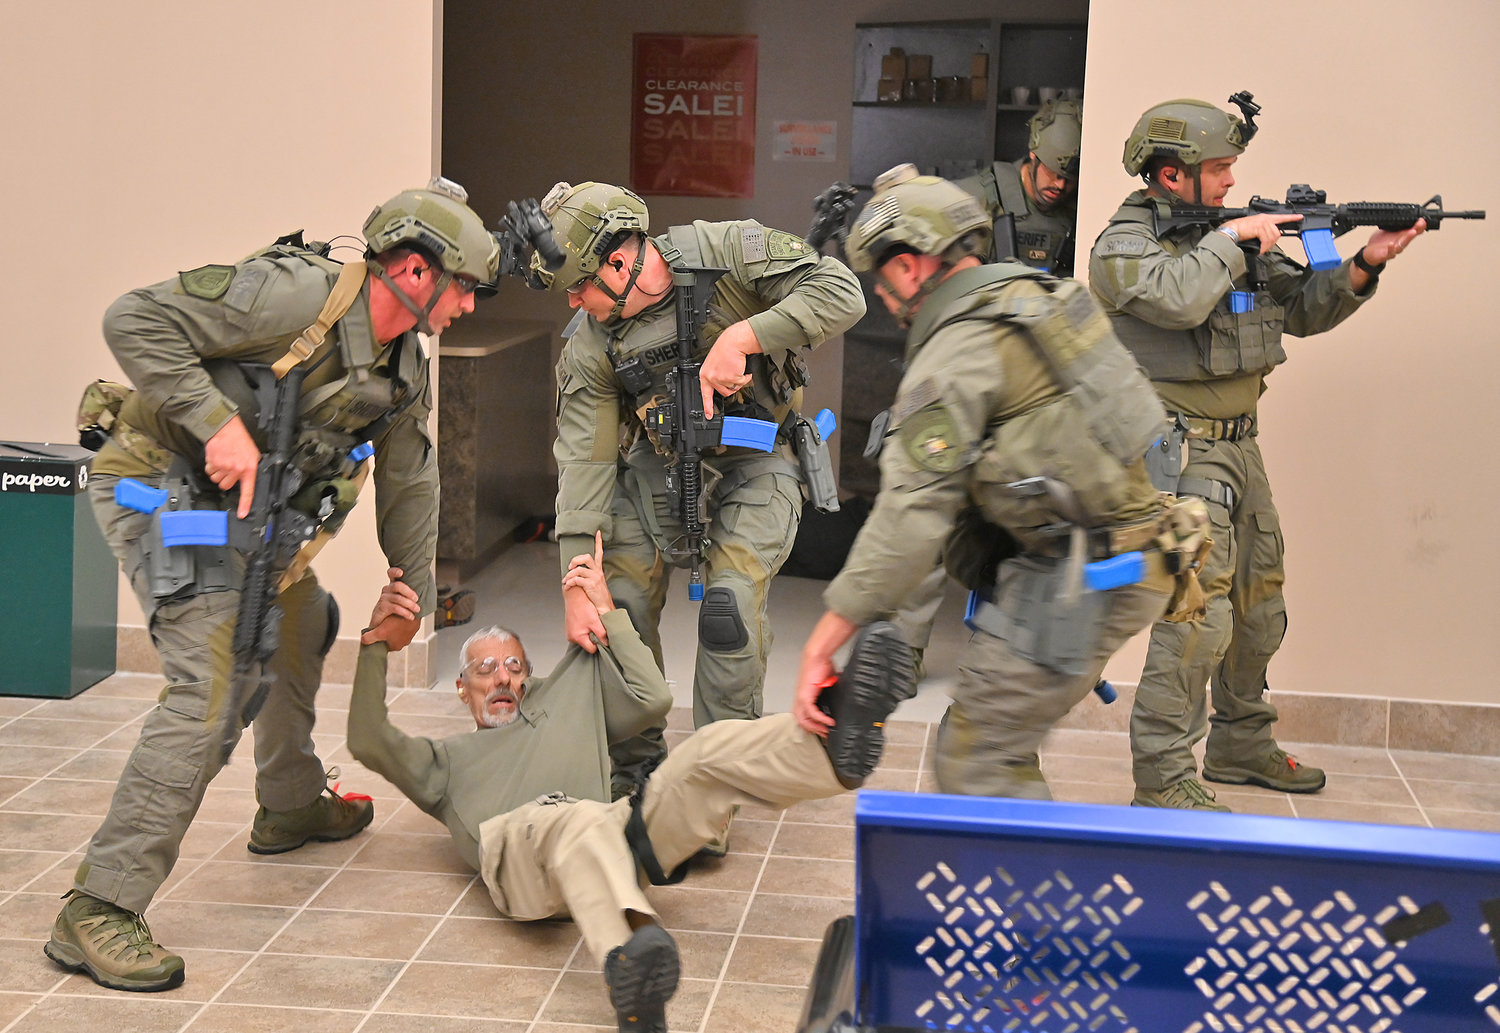 The SWAT team from the Orange County Sheriff’s Office removes a victim from an active shooter scenario at the New York State Preparedness Training Center in Whitestown.